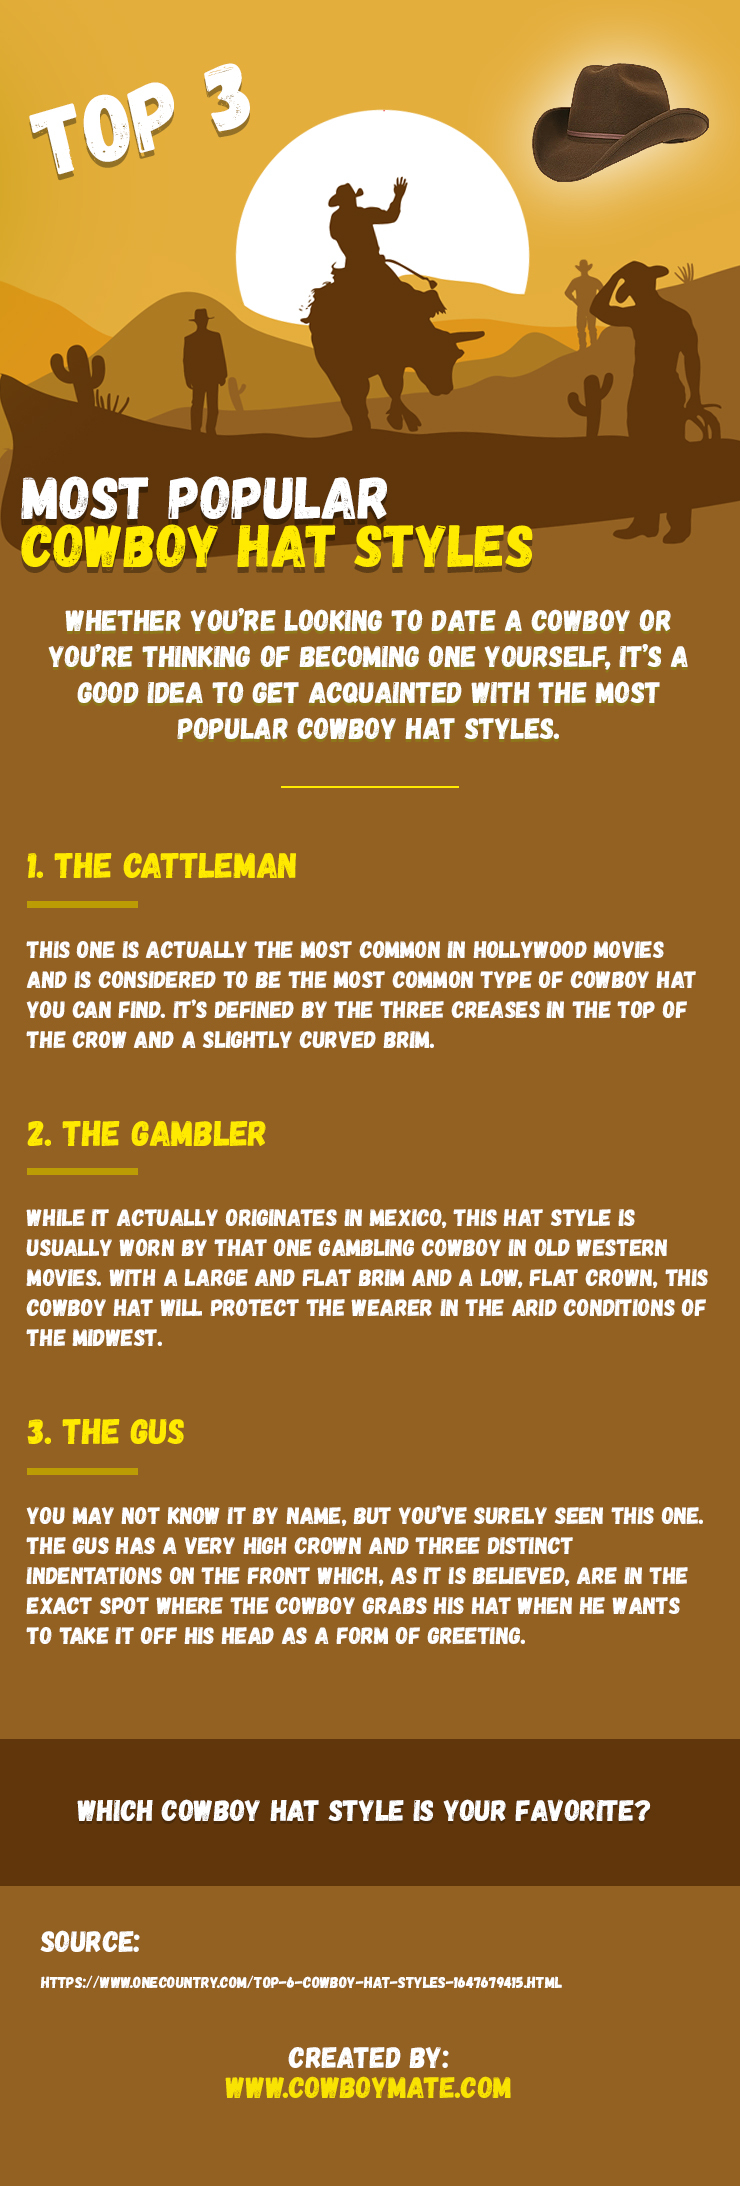 Top 3 Most Popular Cowboy Hat Styles